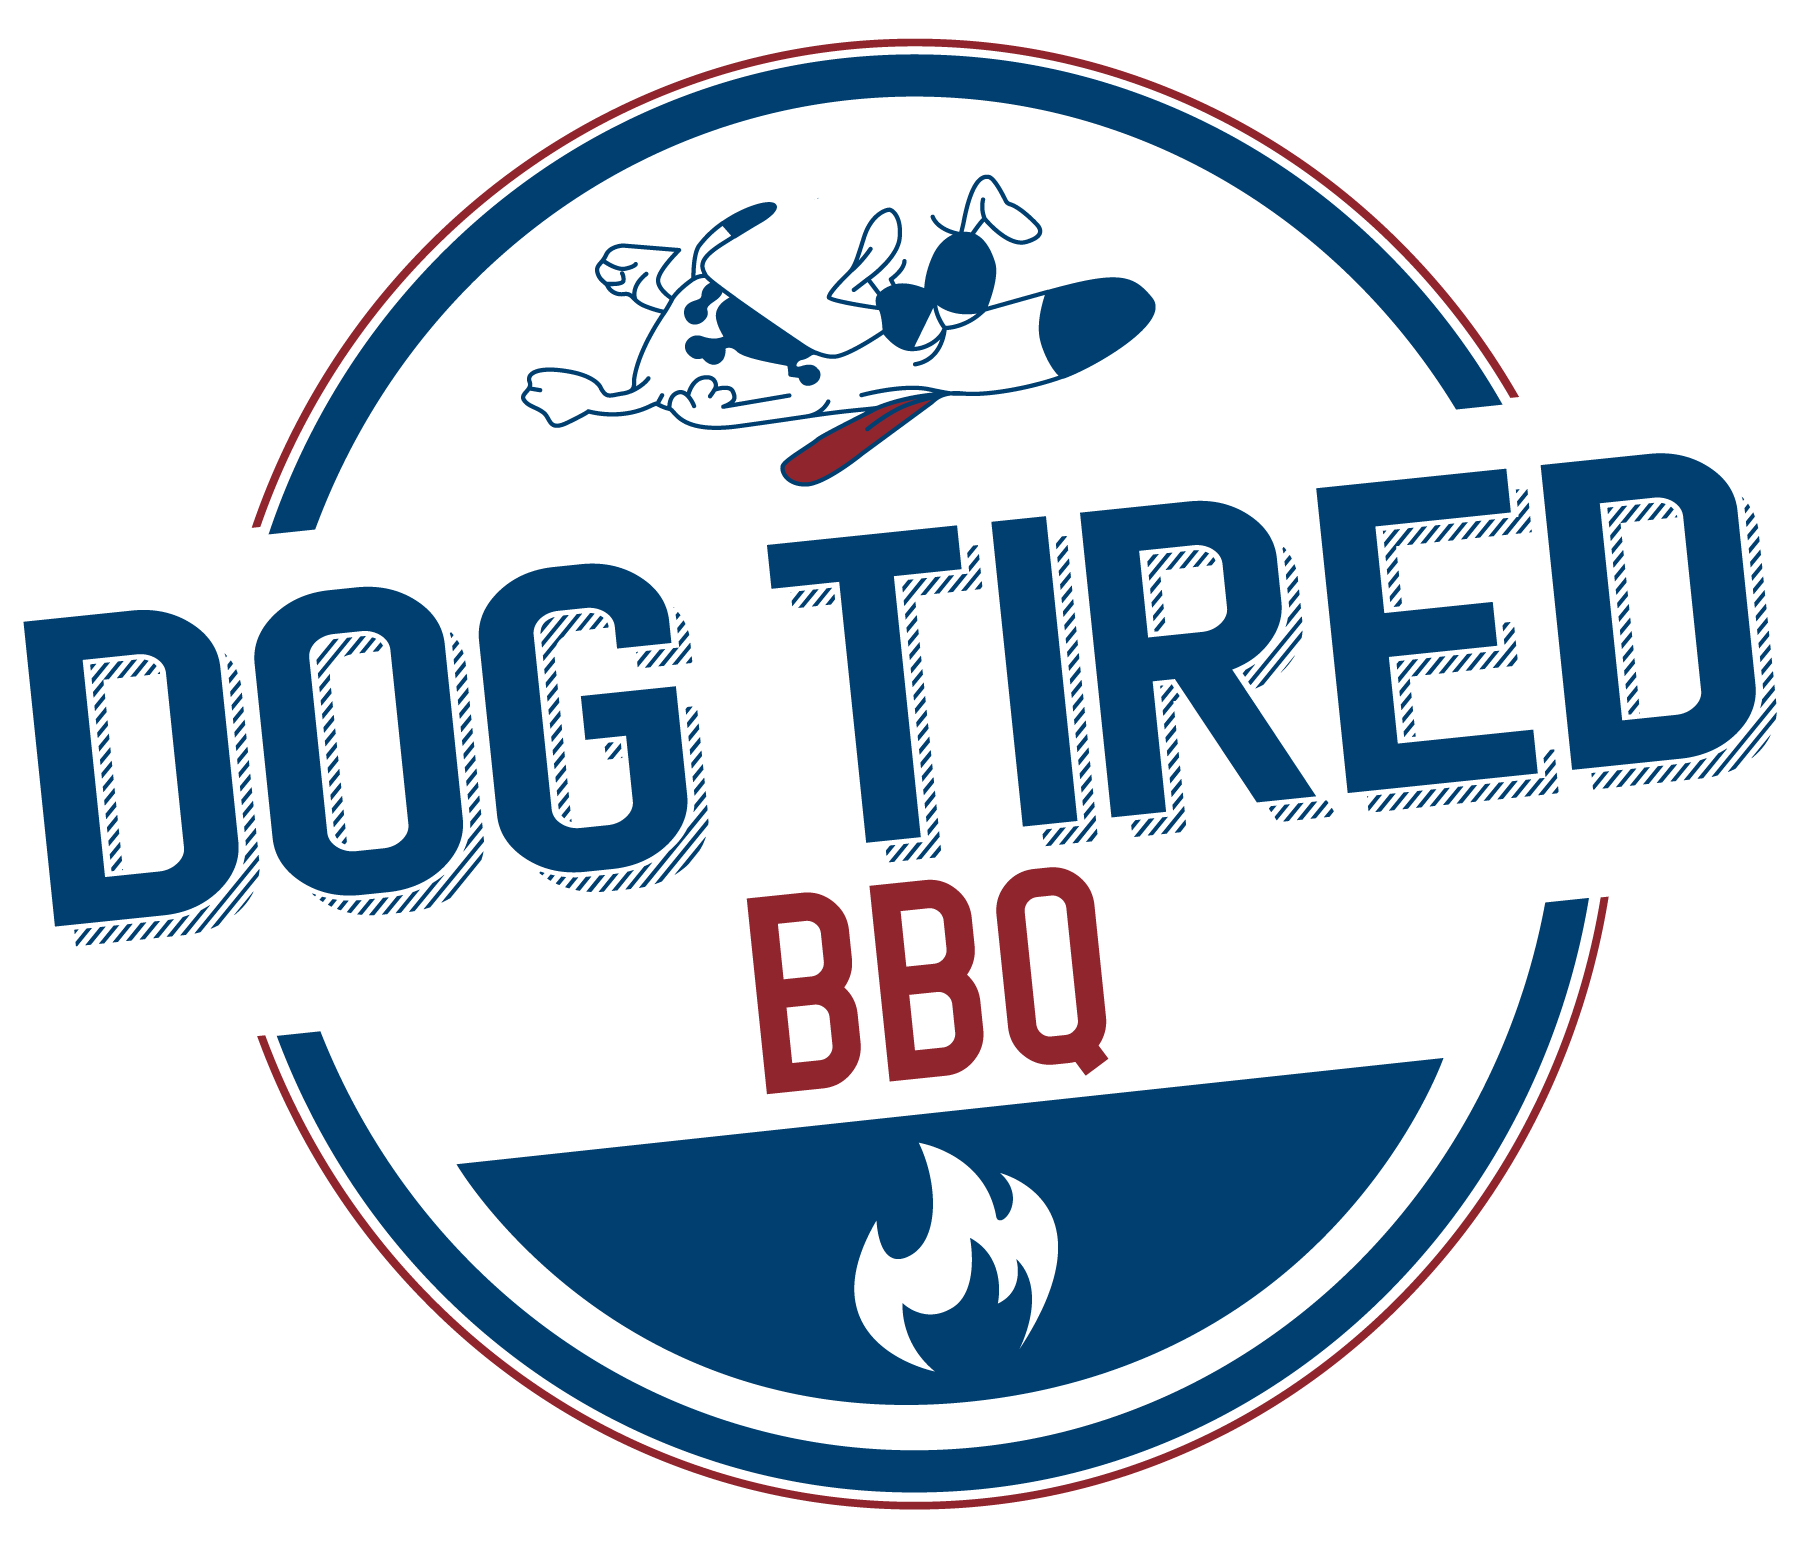 Dog Tired BBQ logo with a tired cartoon dog and flame